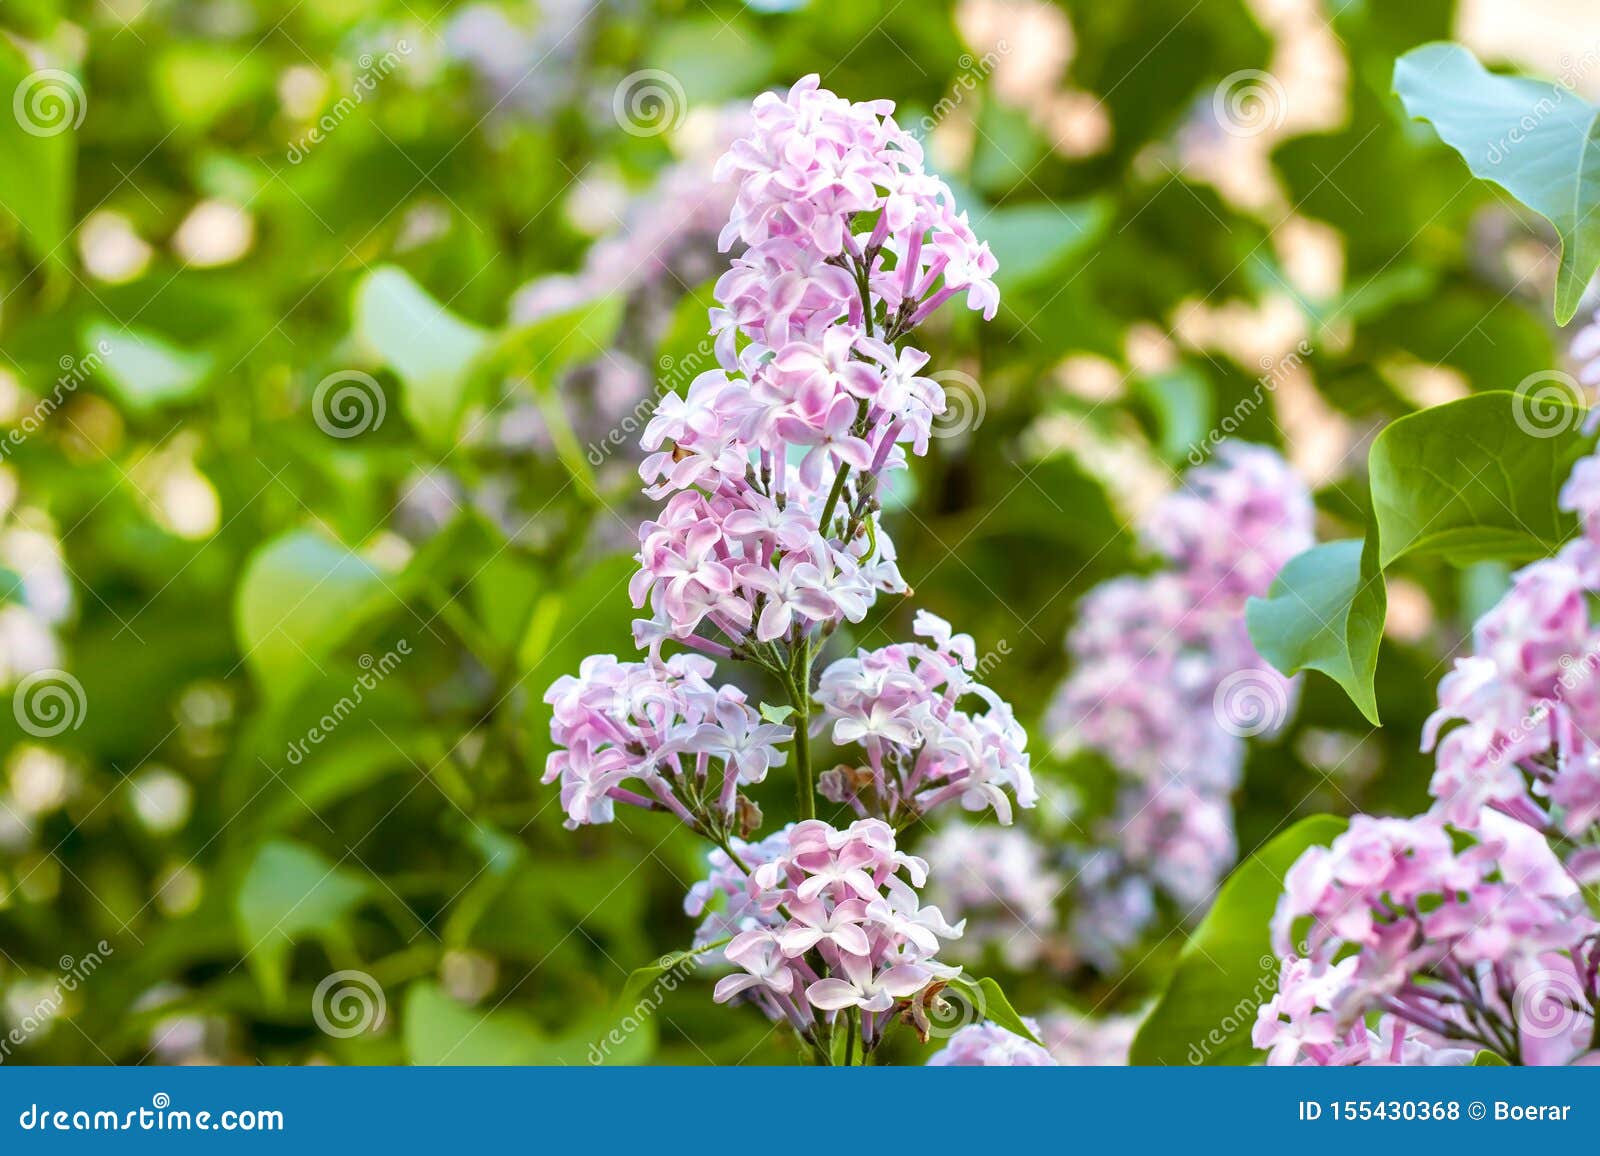 Blossoming Branch Of Light Purple Lilac Syringa Vulgaris Flowers On Green Leaves Background In The Spring Park Stock Photo Image Of Branch Green 155430368